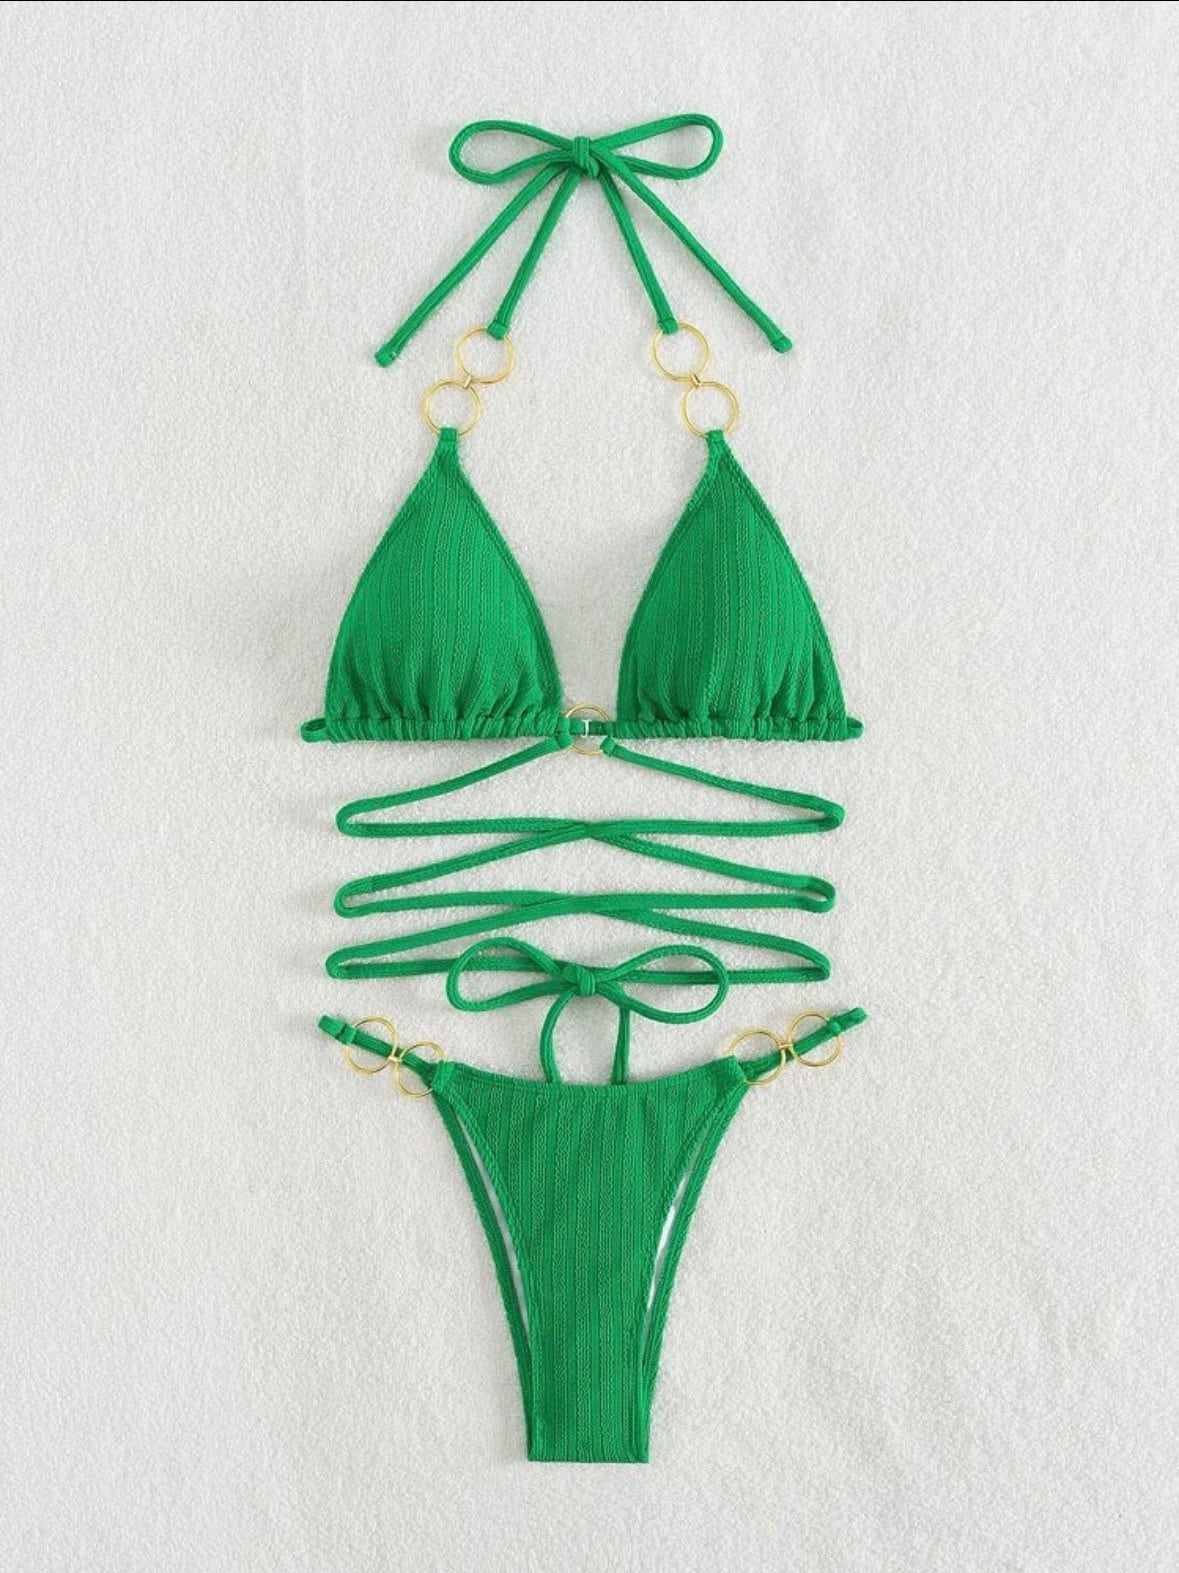 The Tie Me Up Sarah Green swim bikini with tie around strings, gold linked rings, triangle halter top tie, chain ring bottoms swimsuit set